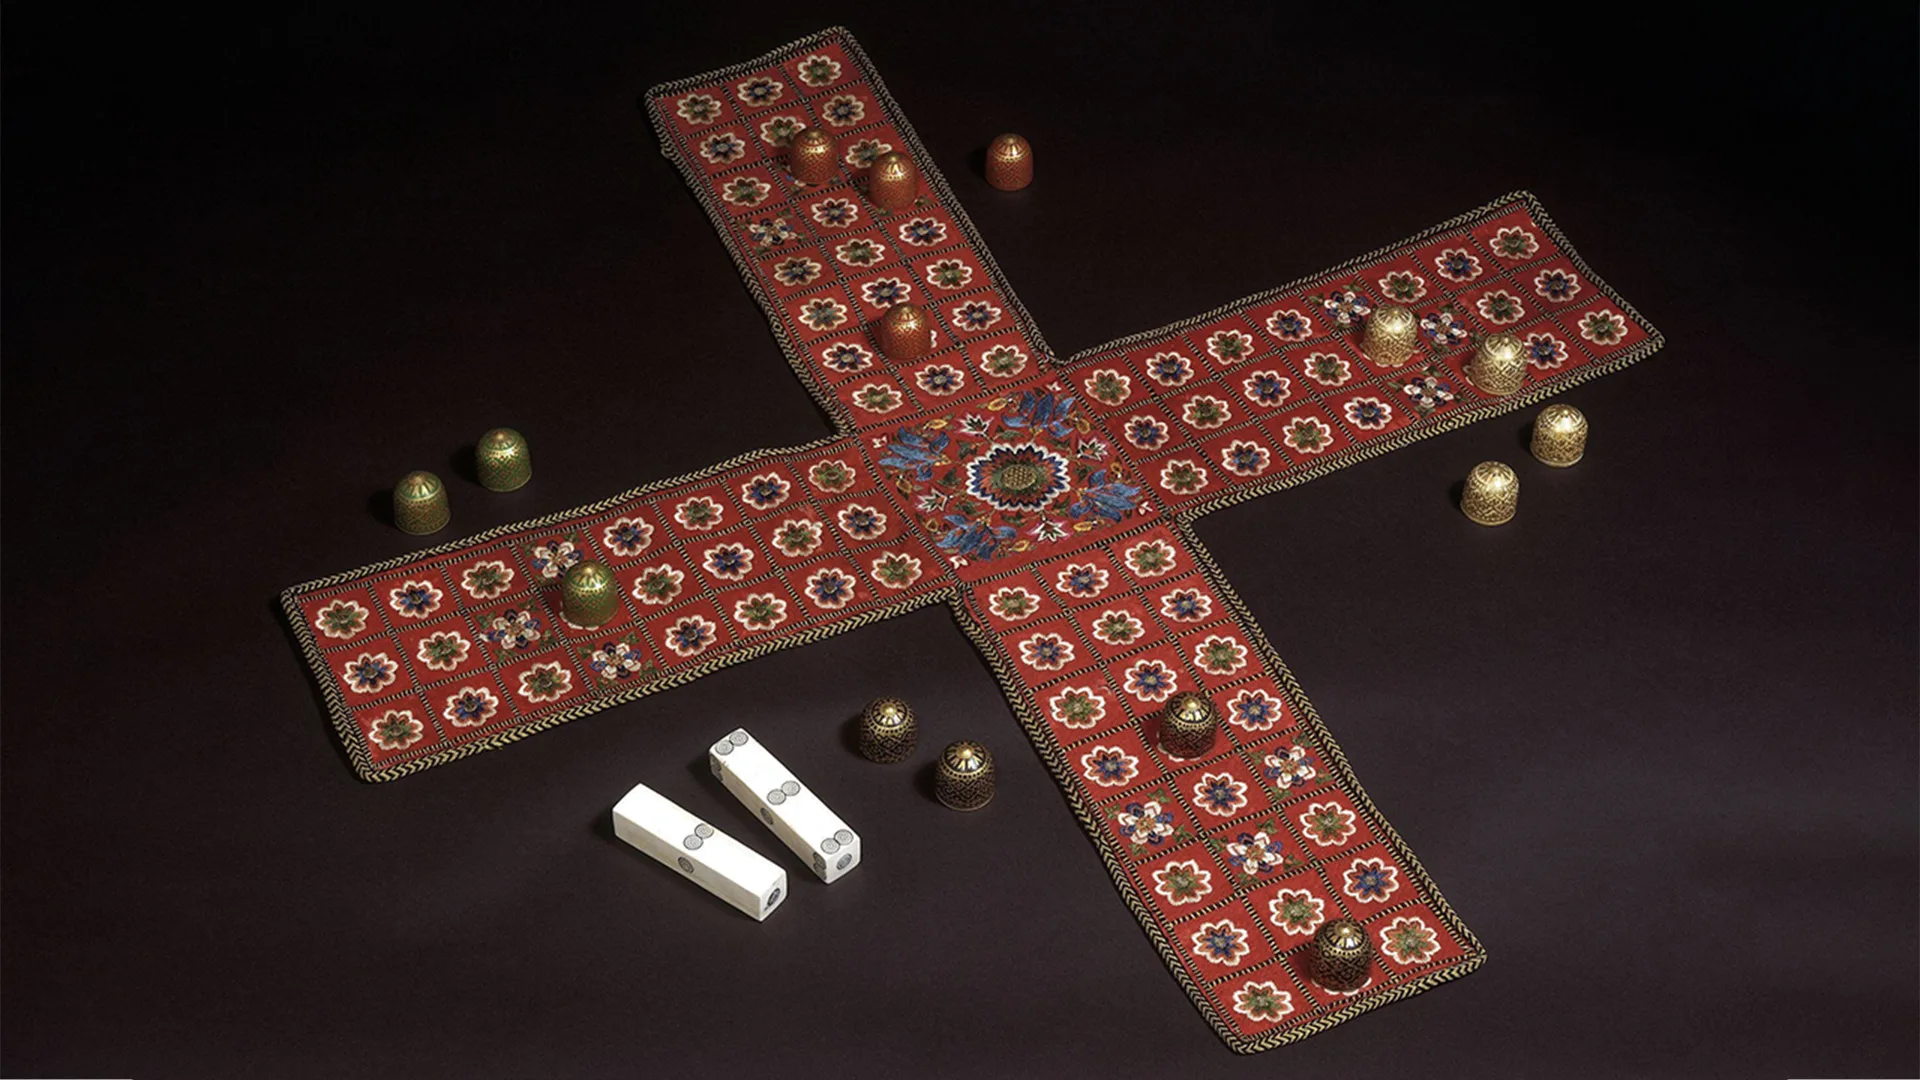 A red fabric board game